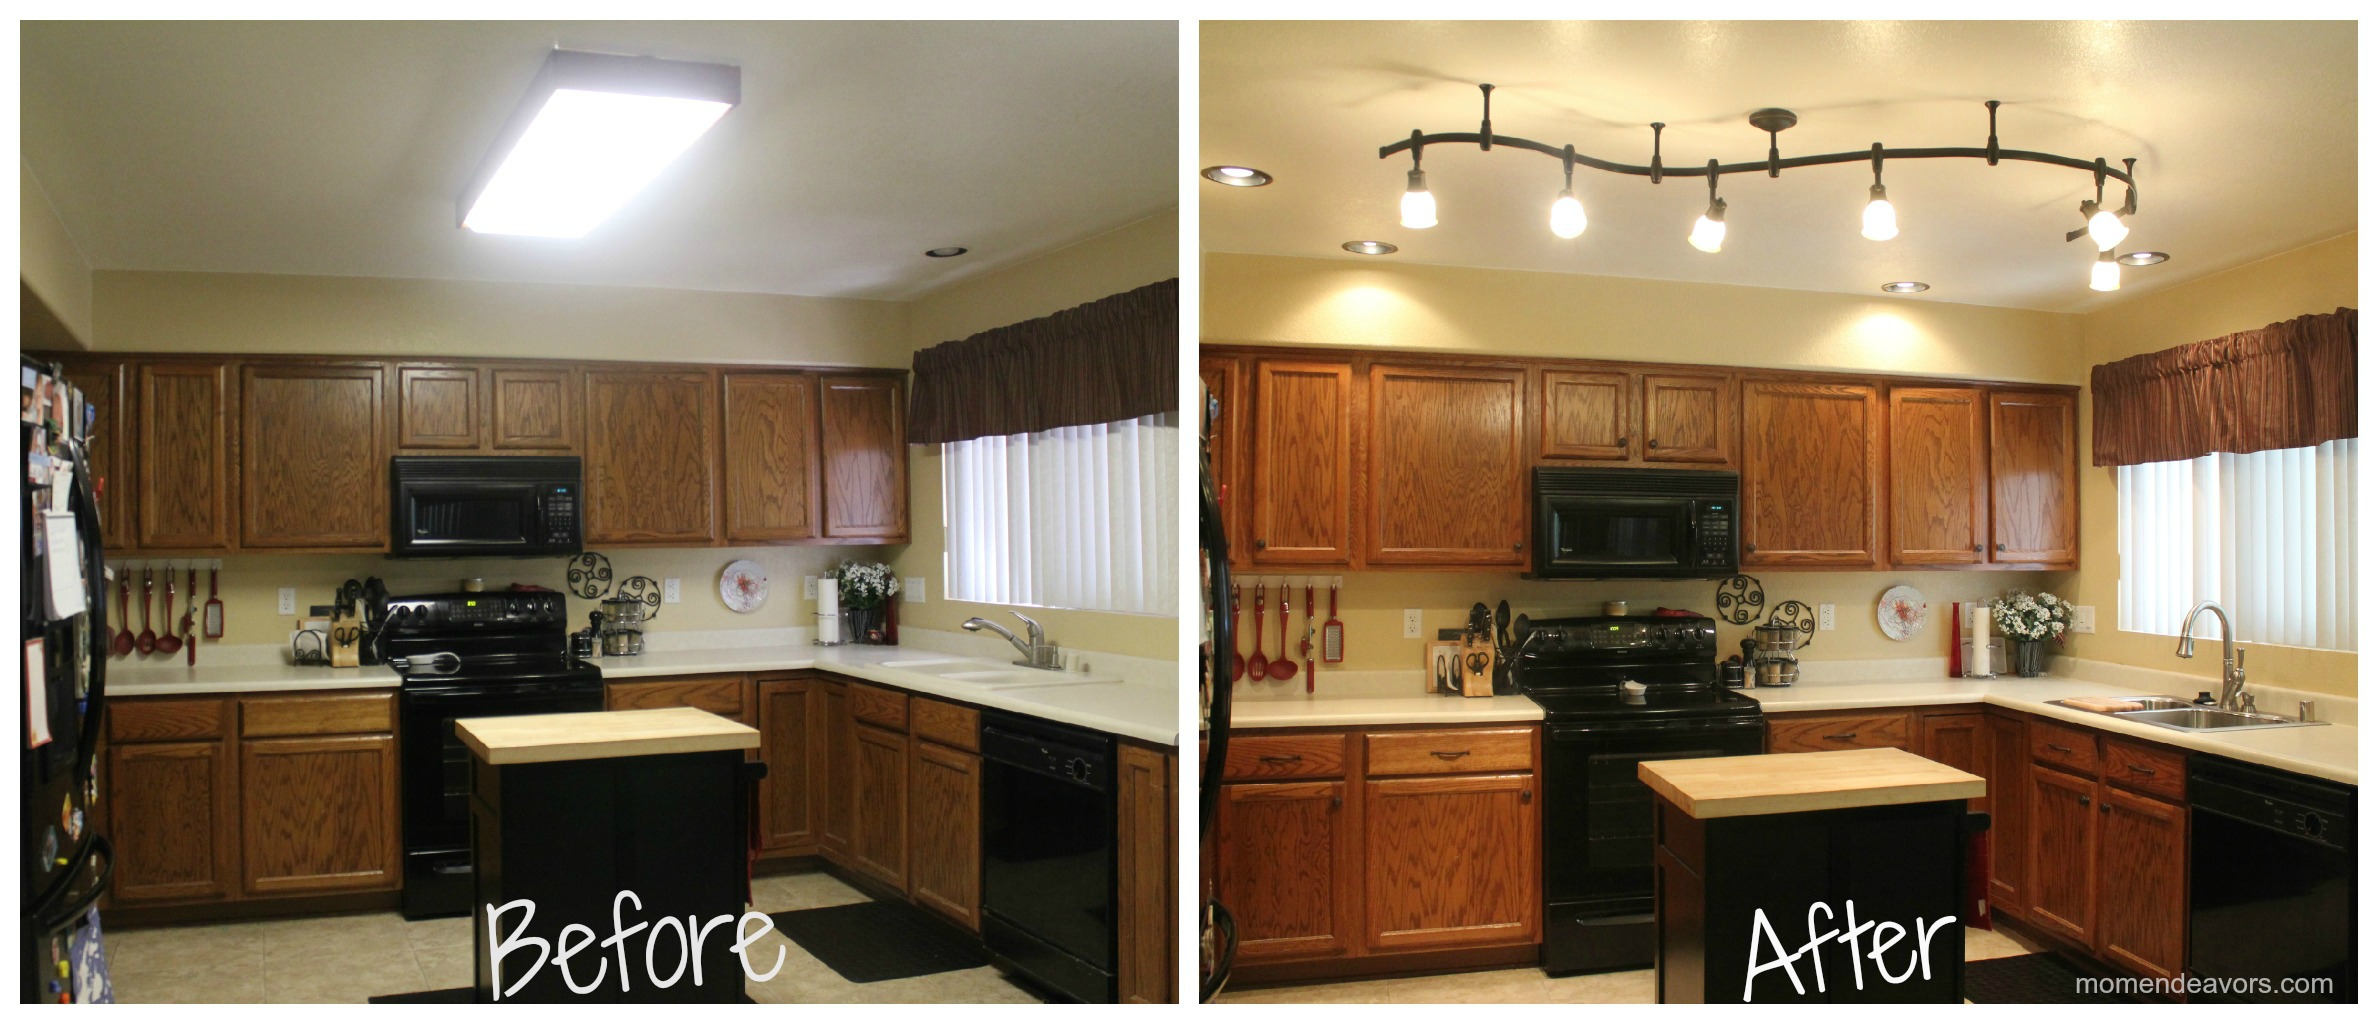 before and after kitchen fluorescent light box makeover